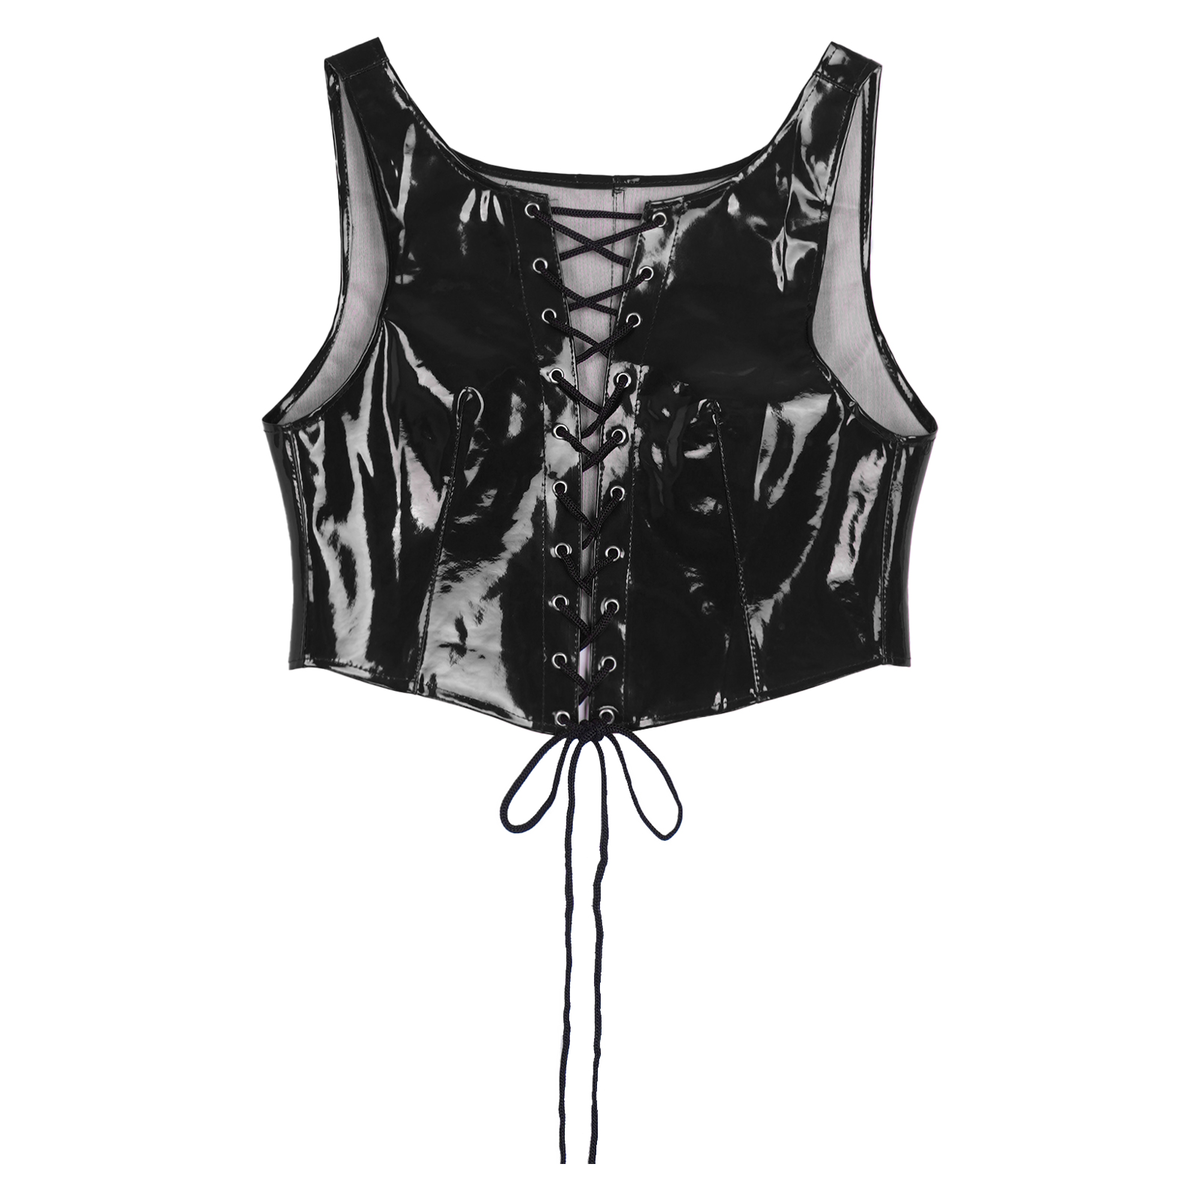 Erotic Ladies Latex Crop Top with Lace-up / Wetlook Patent Leather Corset / Sexy Vest Tank - EVE's SECRETS